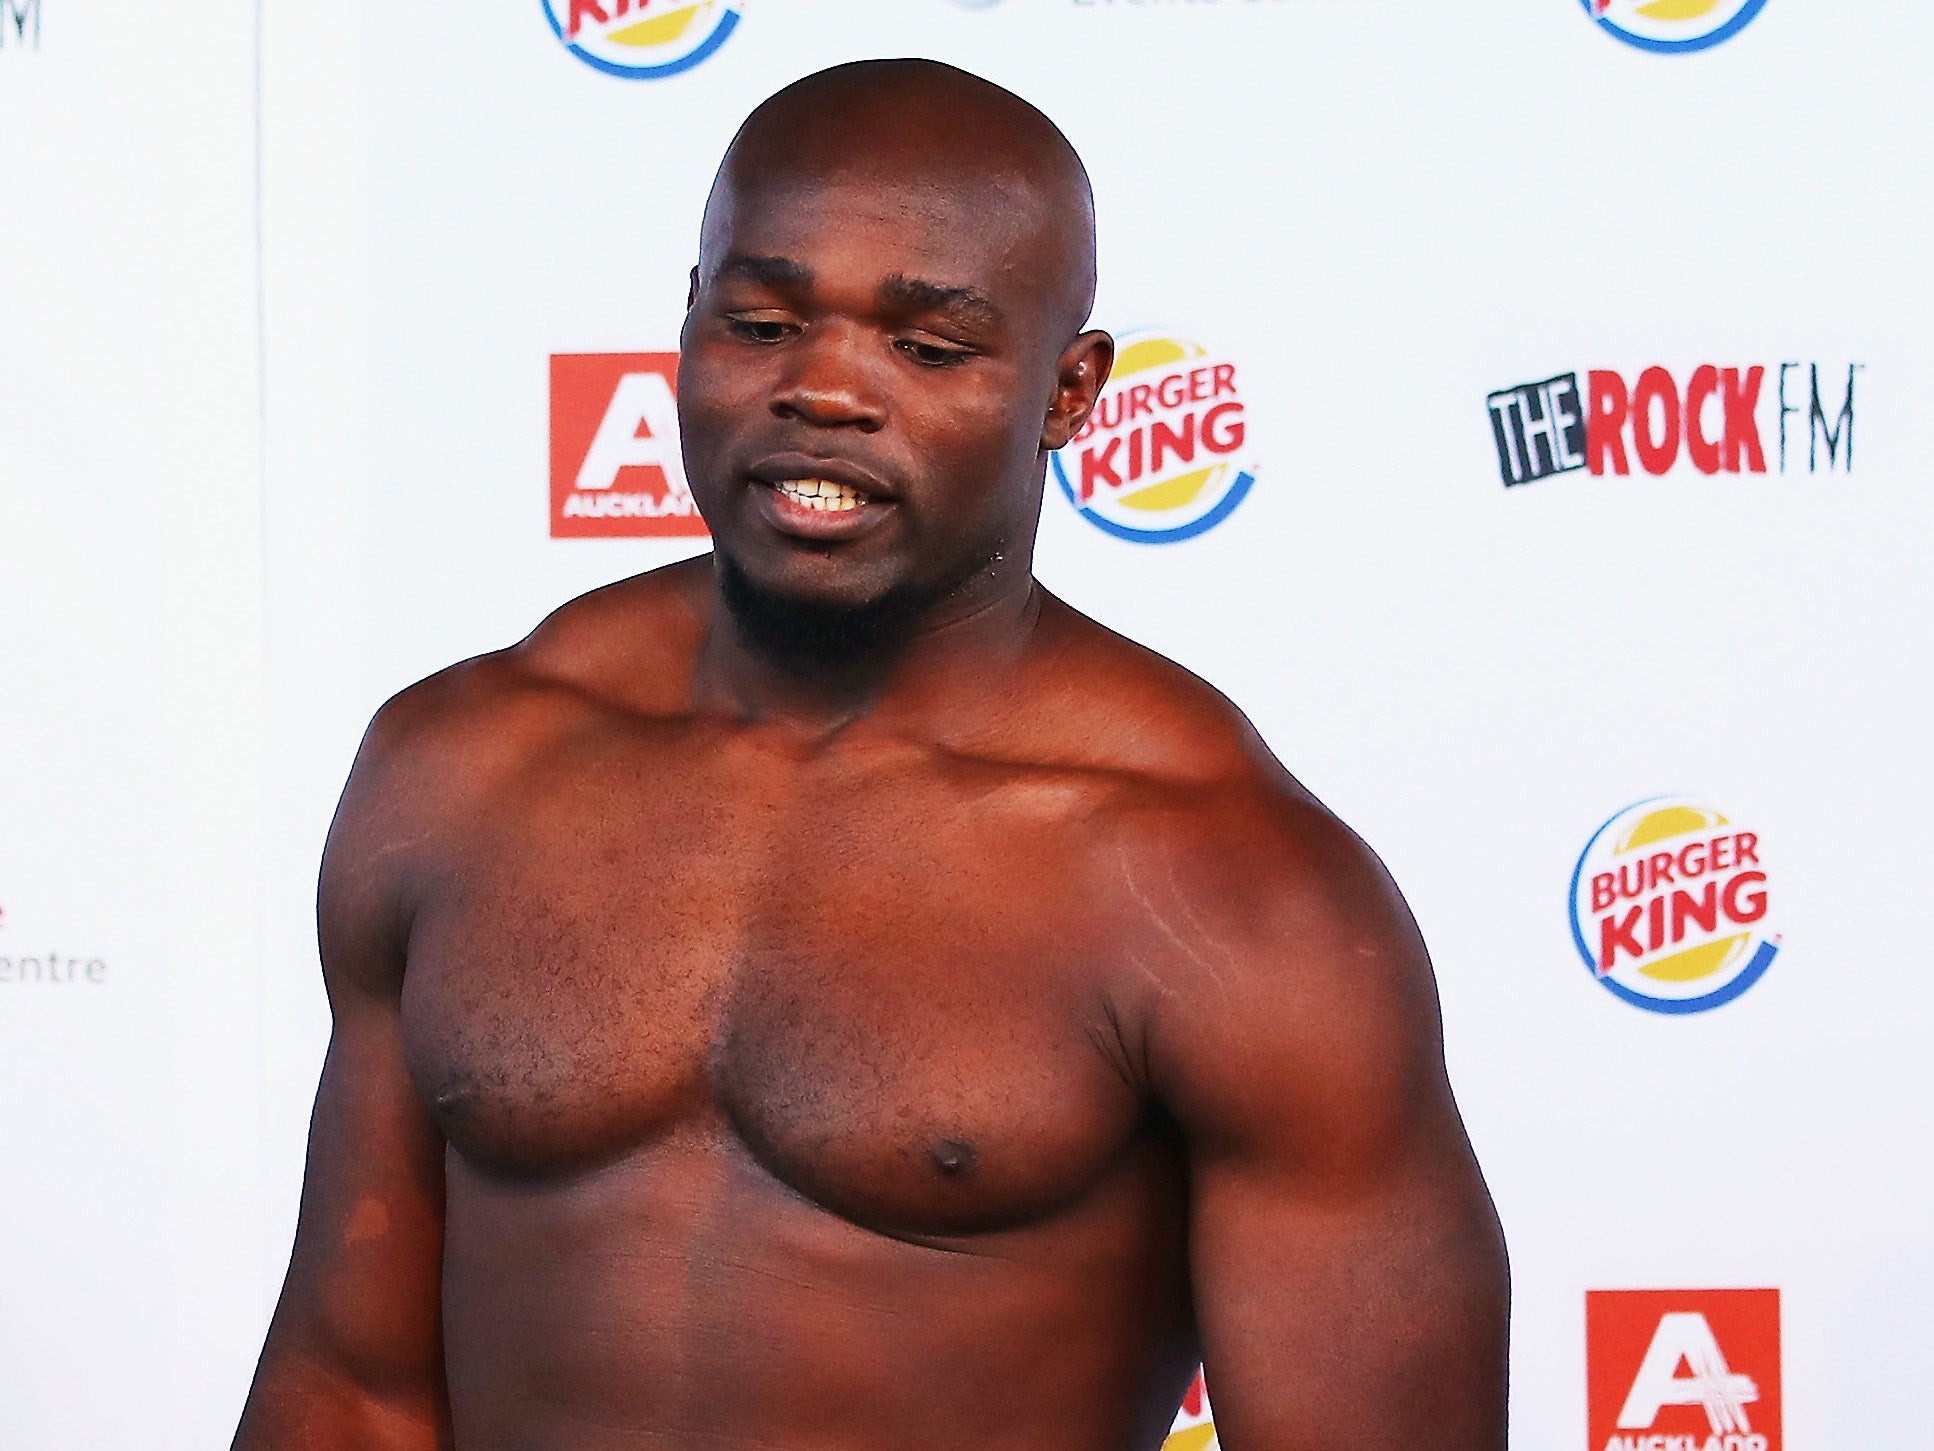 Joshua and his team are taking Takam's challenge seriously